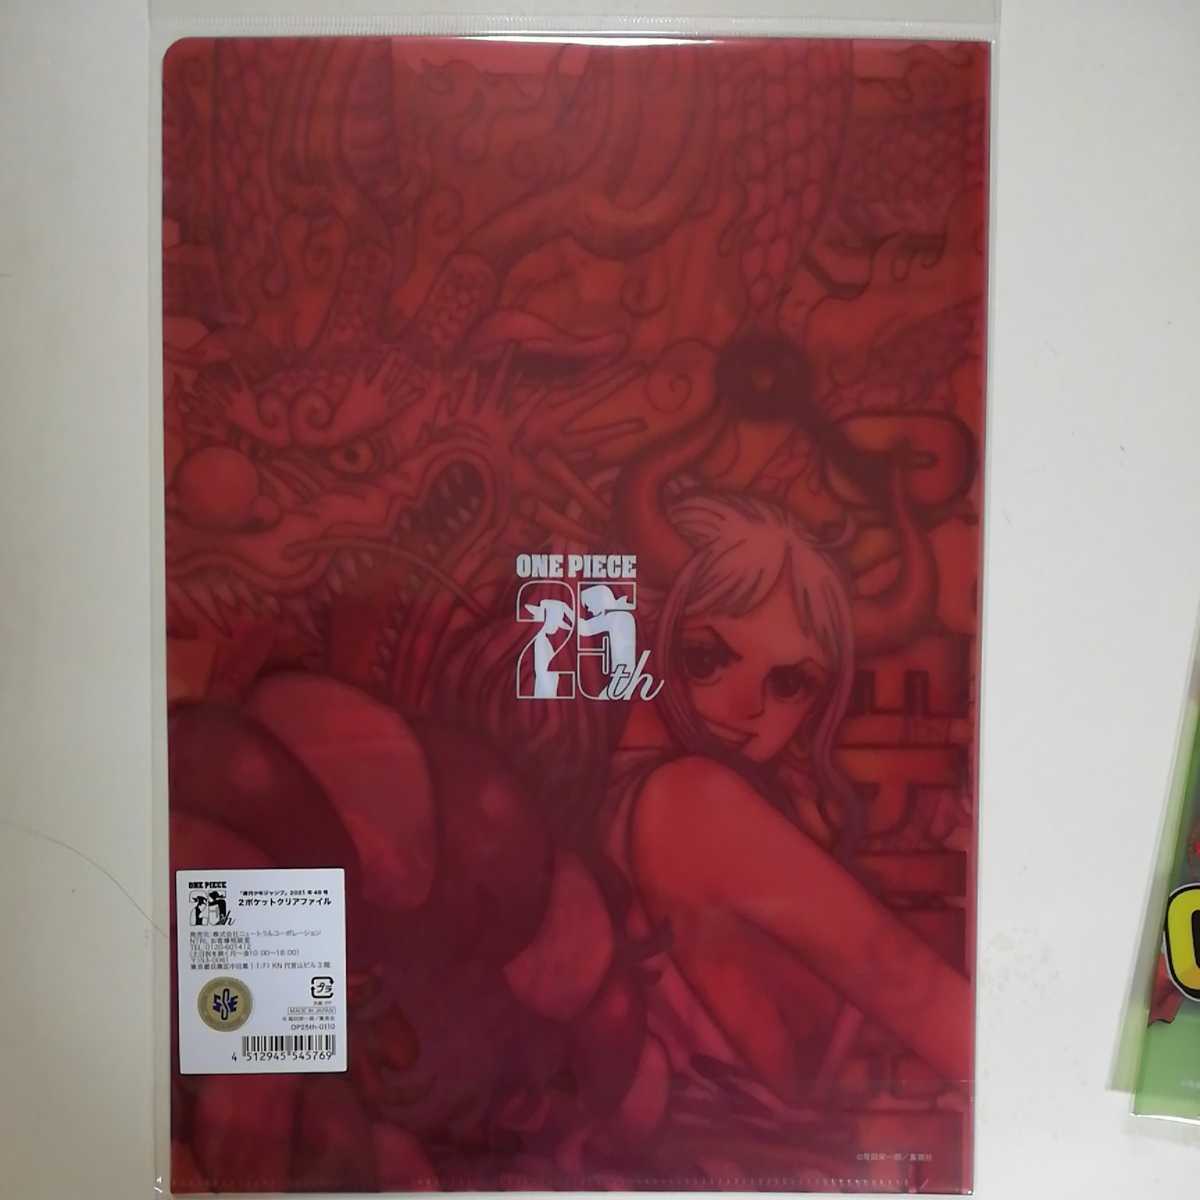 ONE PIECE FILM RED ワンピース フィルム レッド　正規品　クリアファイル　新品　未開封品 25周年　ミュージアム　渋谷キャスト　ヤマト